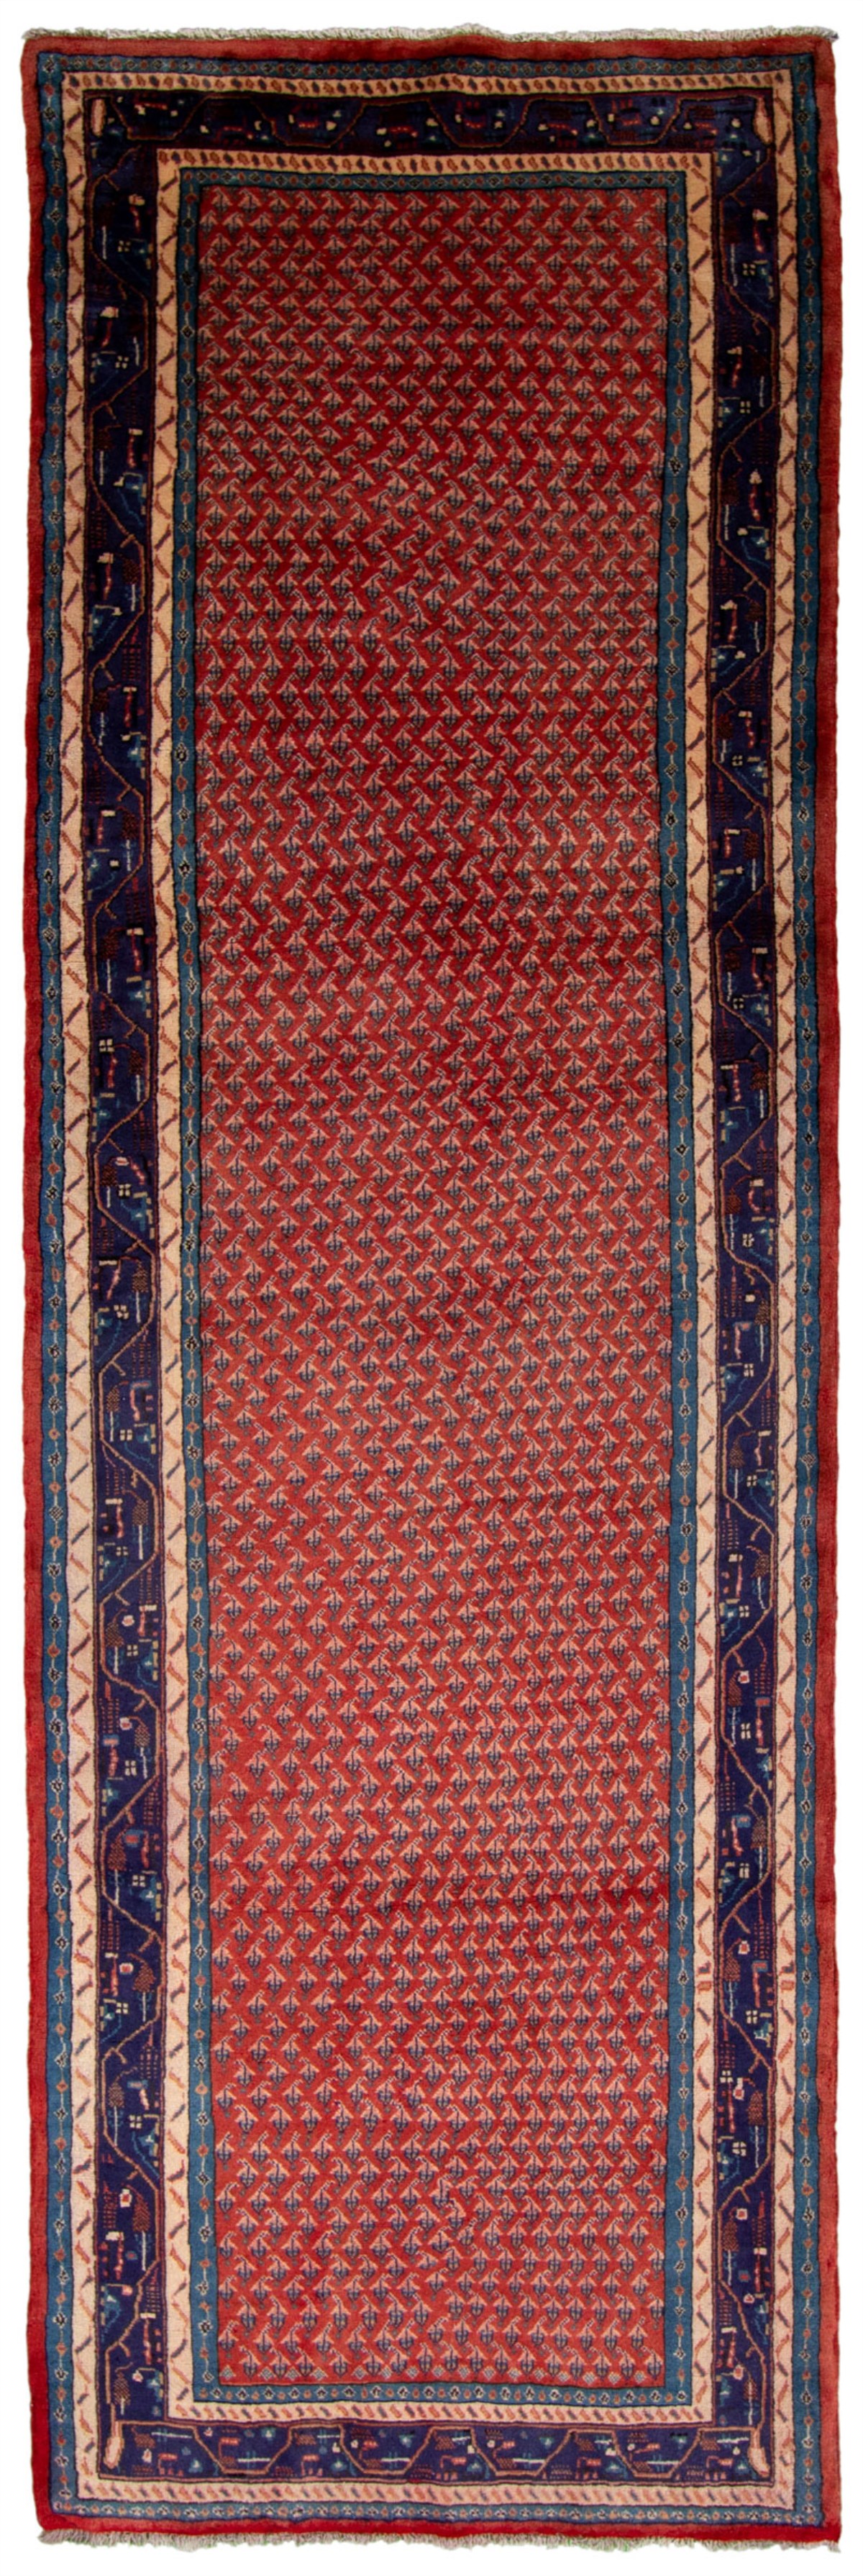 Hand-knotted Arak Red Wool Rug 3'7" x 11'2" Size: 3'7" x 11'2"  